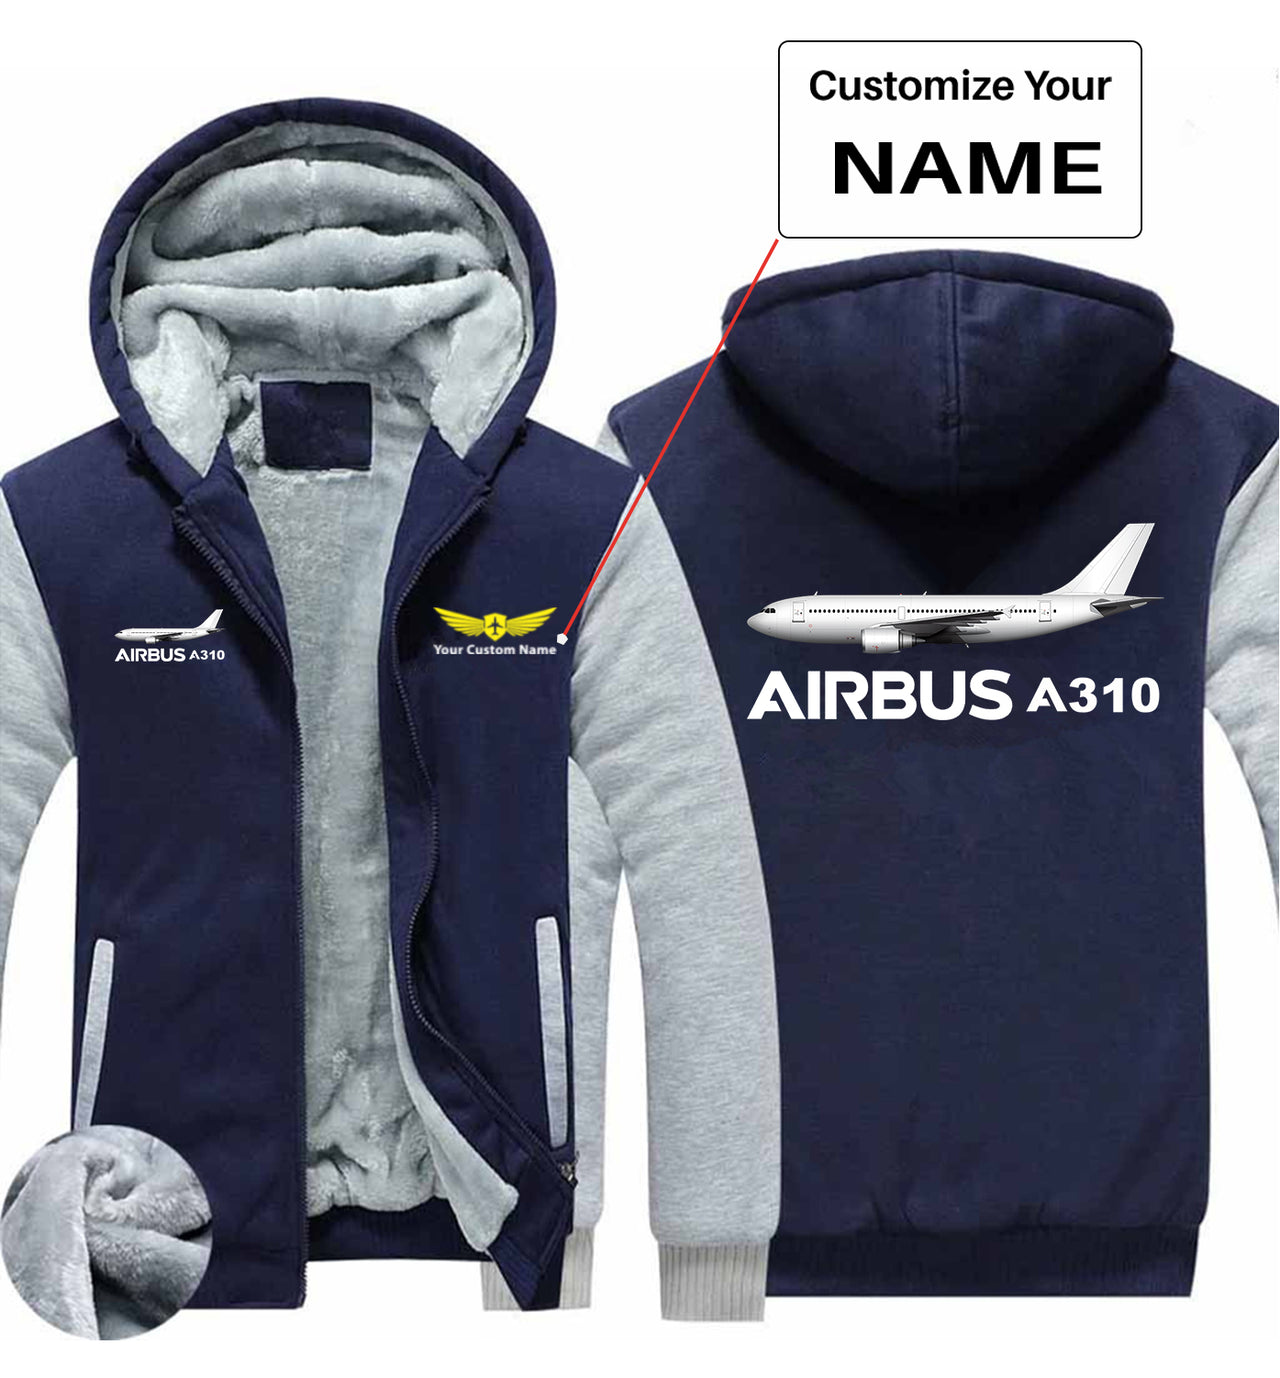 The Airbus A310 Designed Zipped Sweatshirts